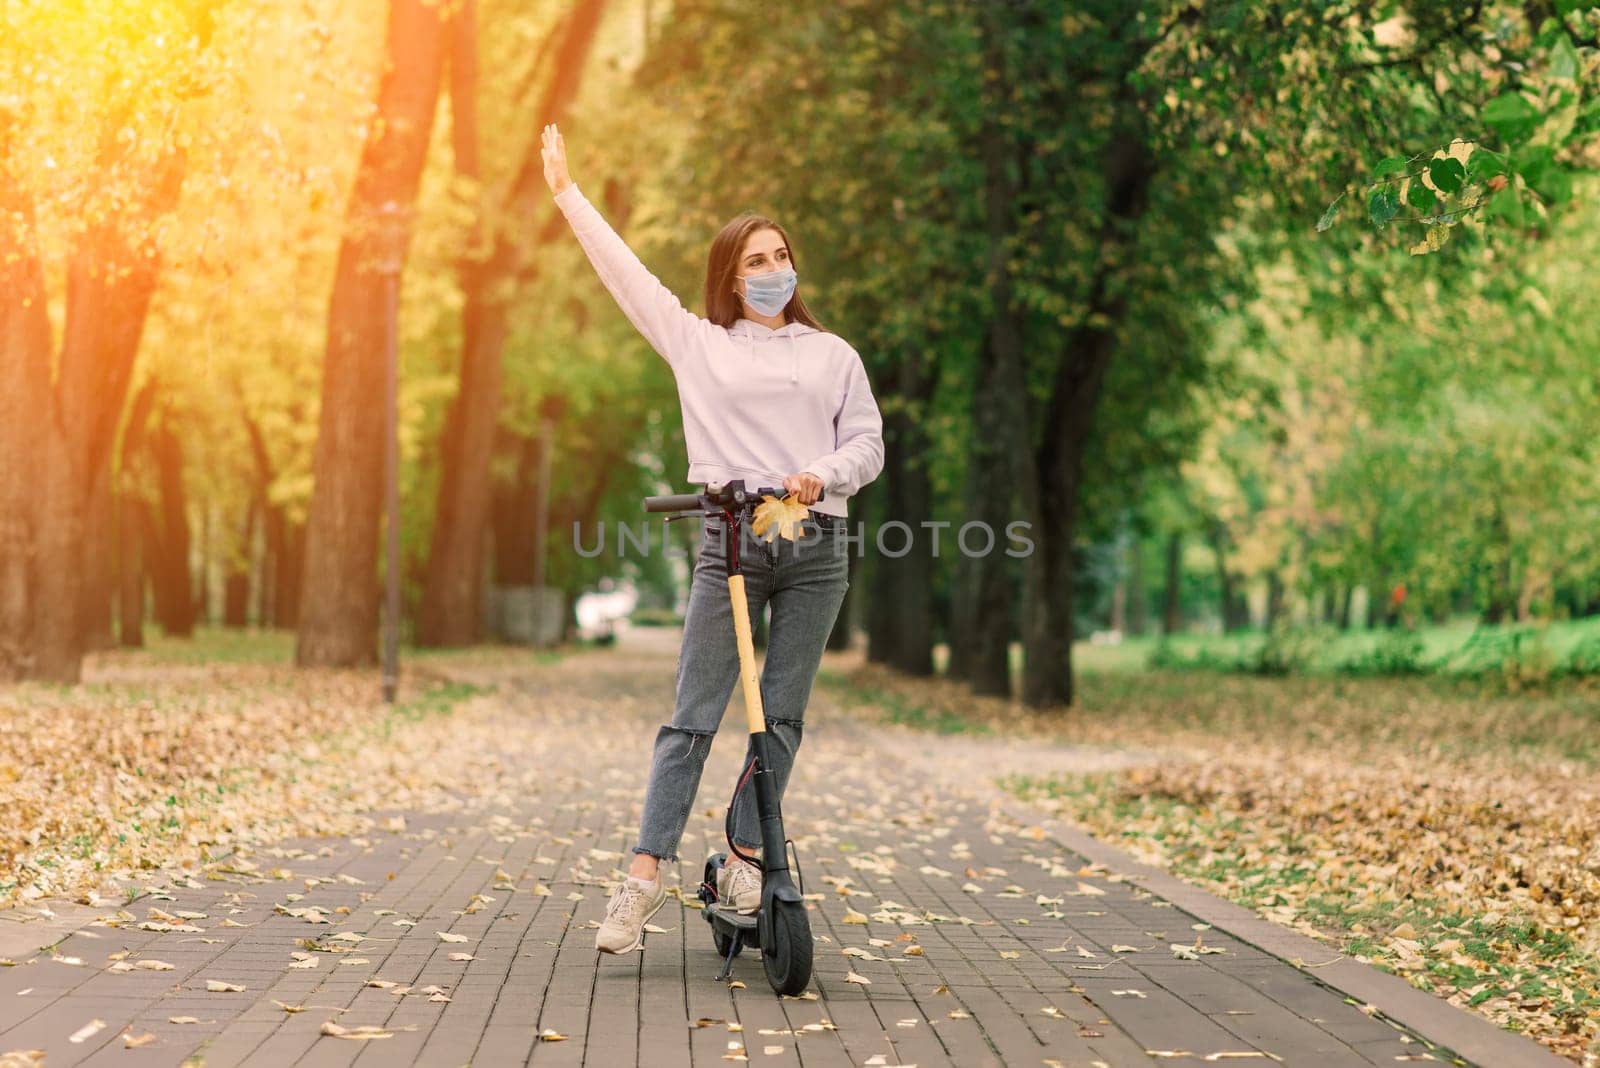 Casual caucasian female wearing protective face mask riding urban electric scooter in city park during covid pandemic. Urban mobility concept.